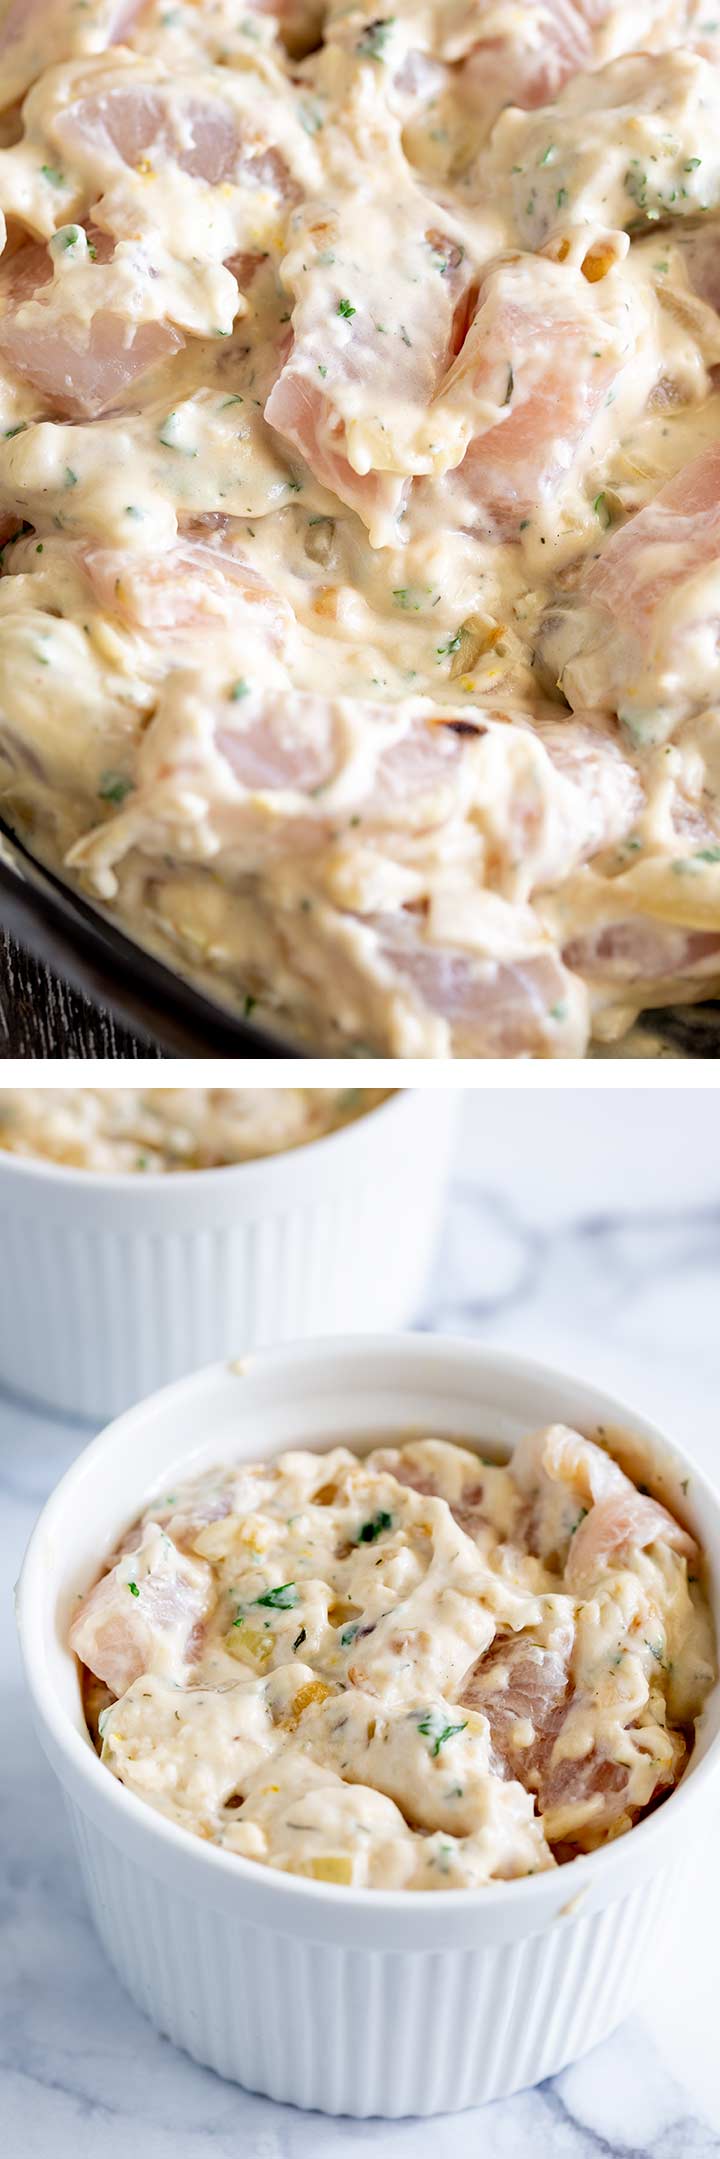 Tow pictures of the raw fish pie filling. One in a pan and one in a ramekin 